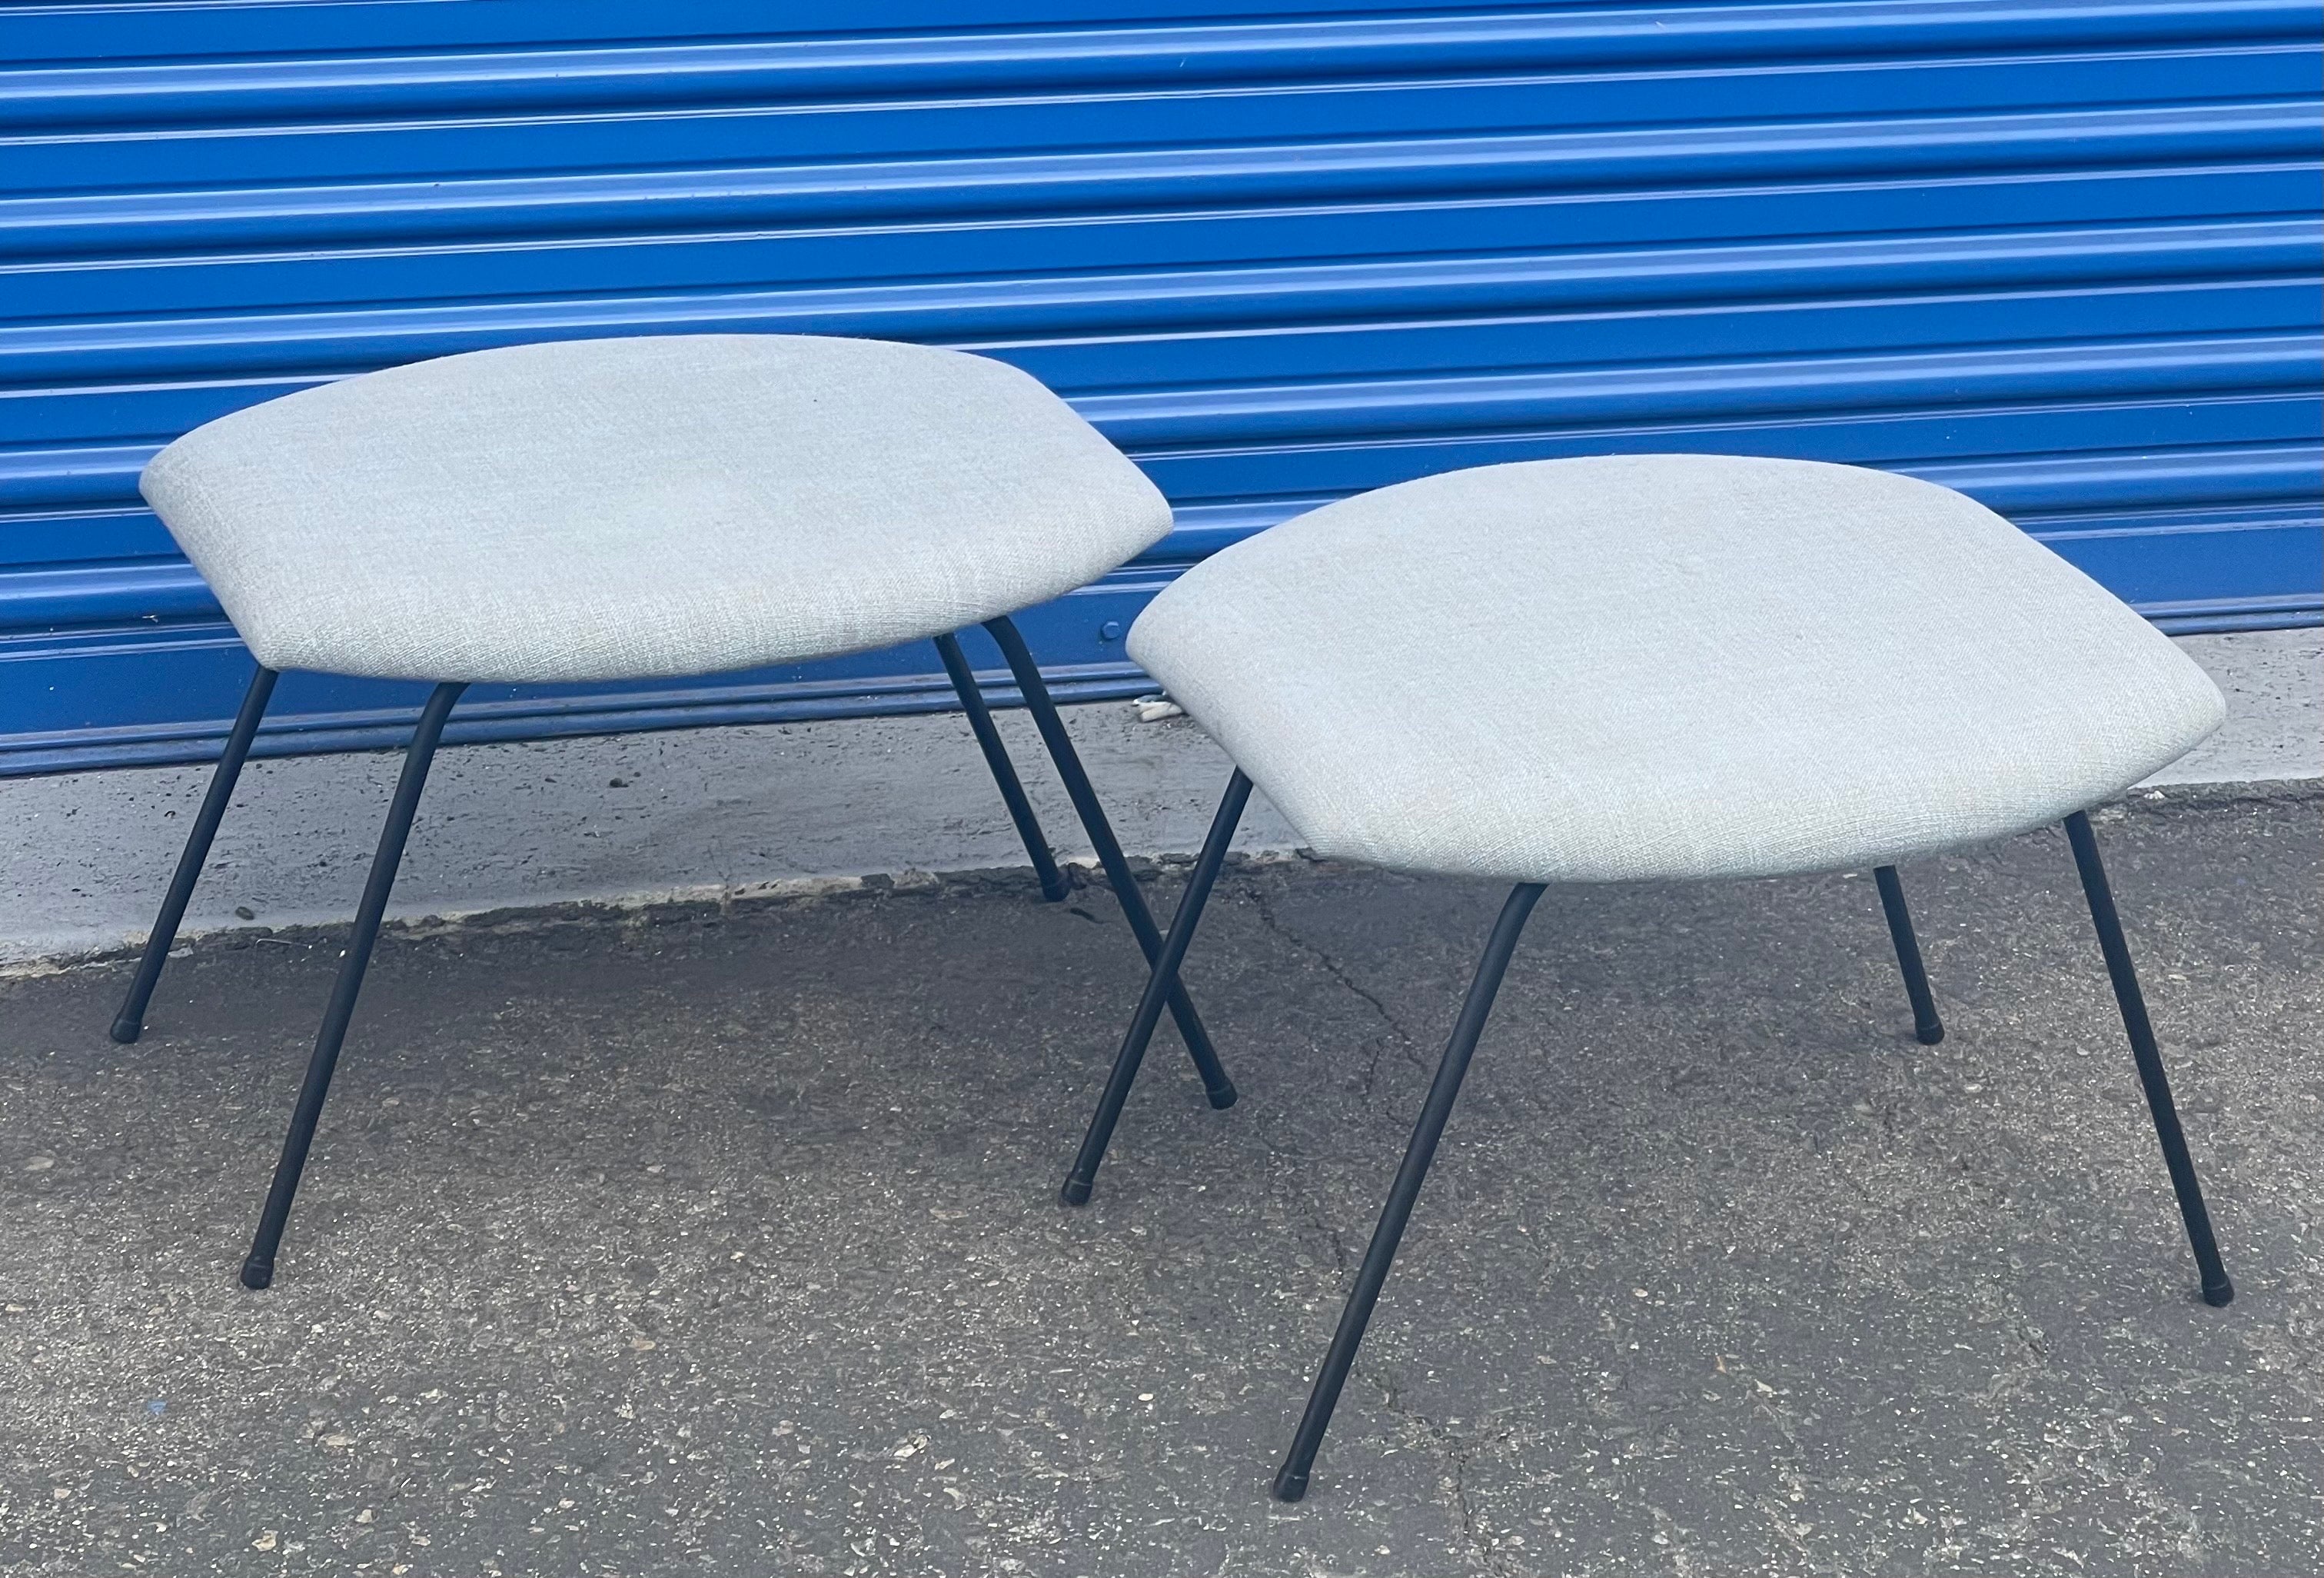 Pair of atomic age iron base ottomans / benches by Joseph Cicchelli, circa 1950s. Great California design on this pair of freshly reupholstered ottomans / stools /benches with linen fabric. The legs are solid iron pipping and have been resprayed in